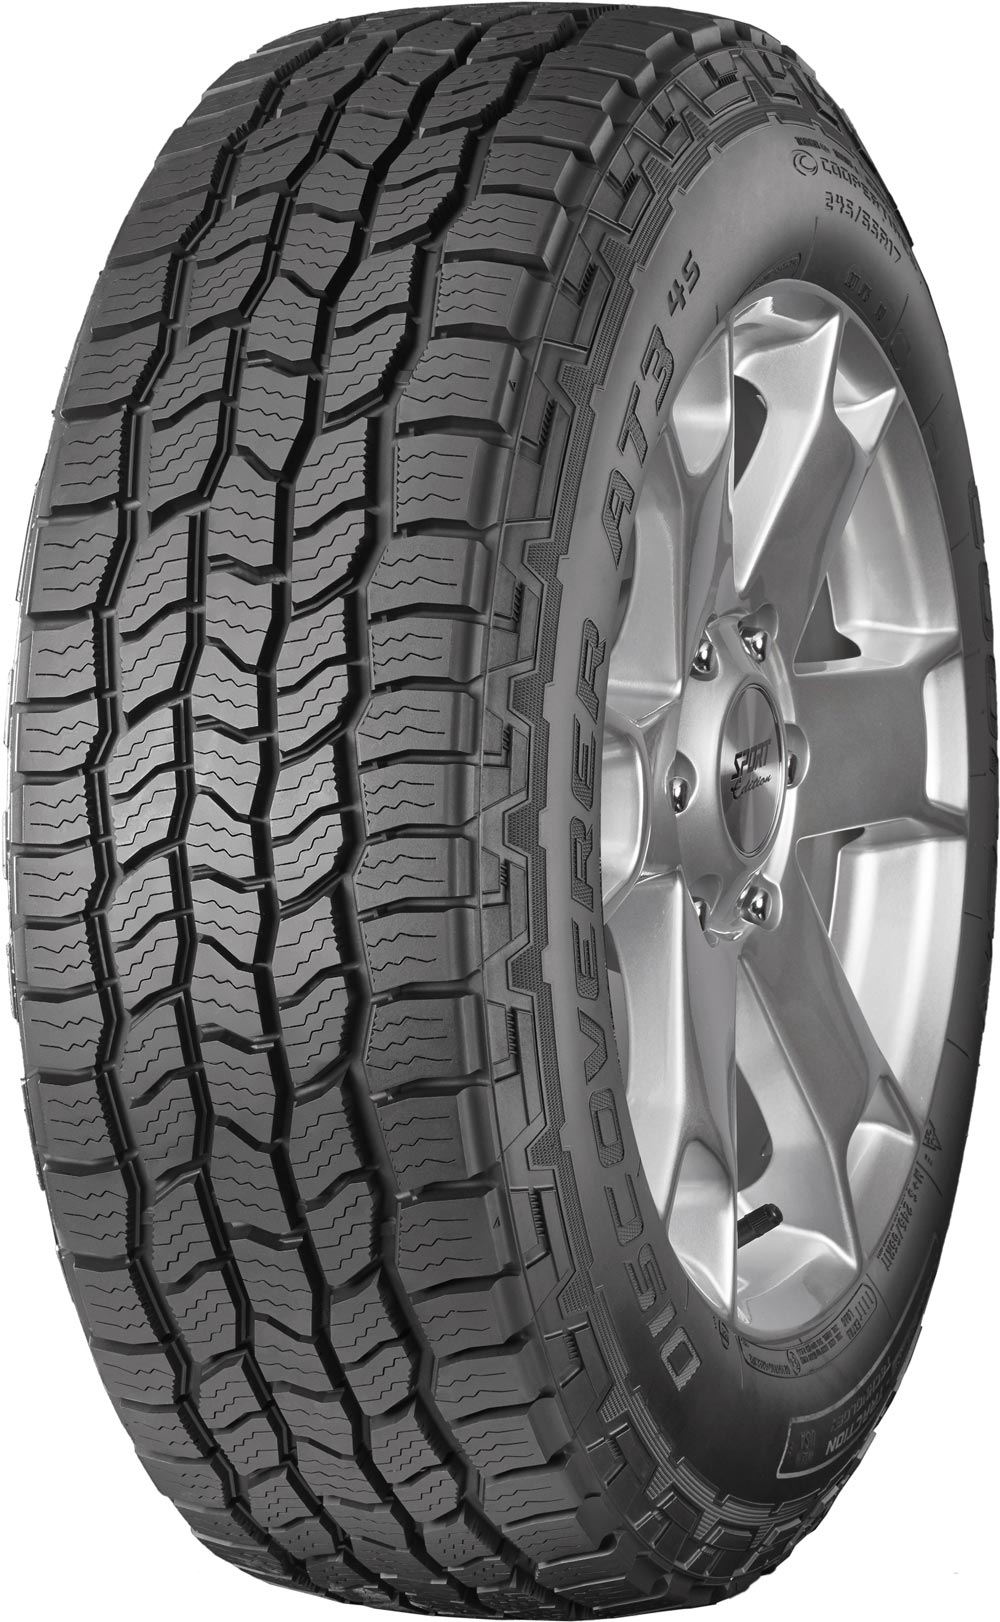 Джипови гуми COOPER DISCOVERER AT3 4S 225/70 R15 100T